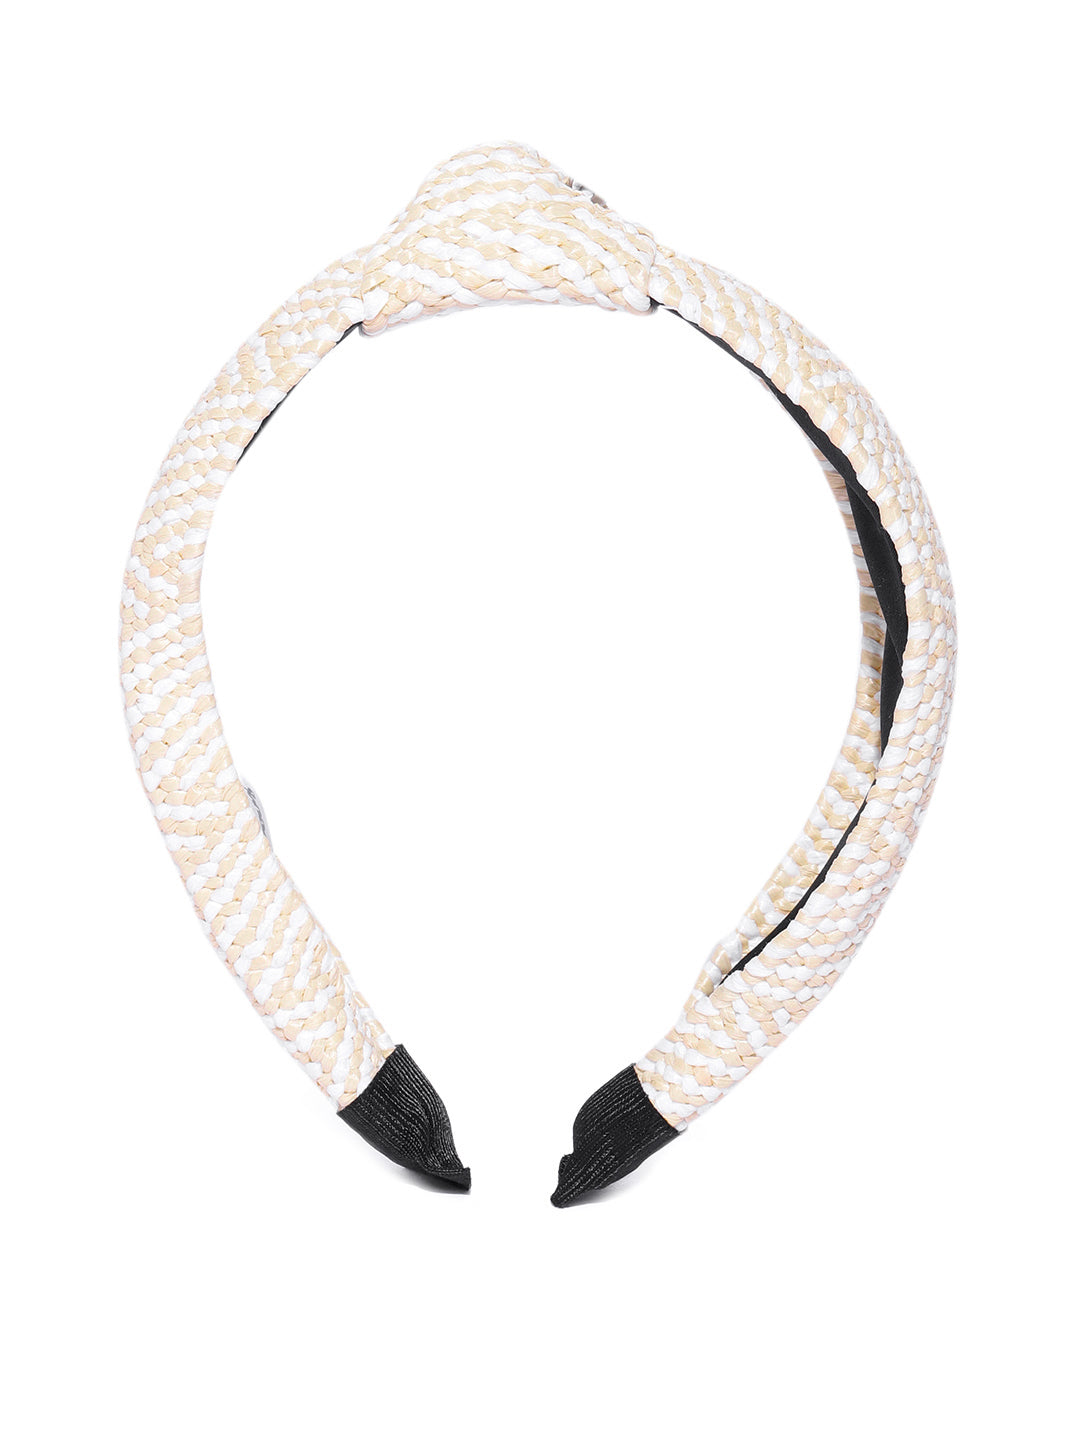 Blueberry cream and white jute knot hair band